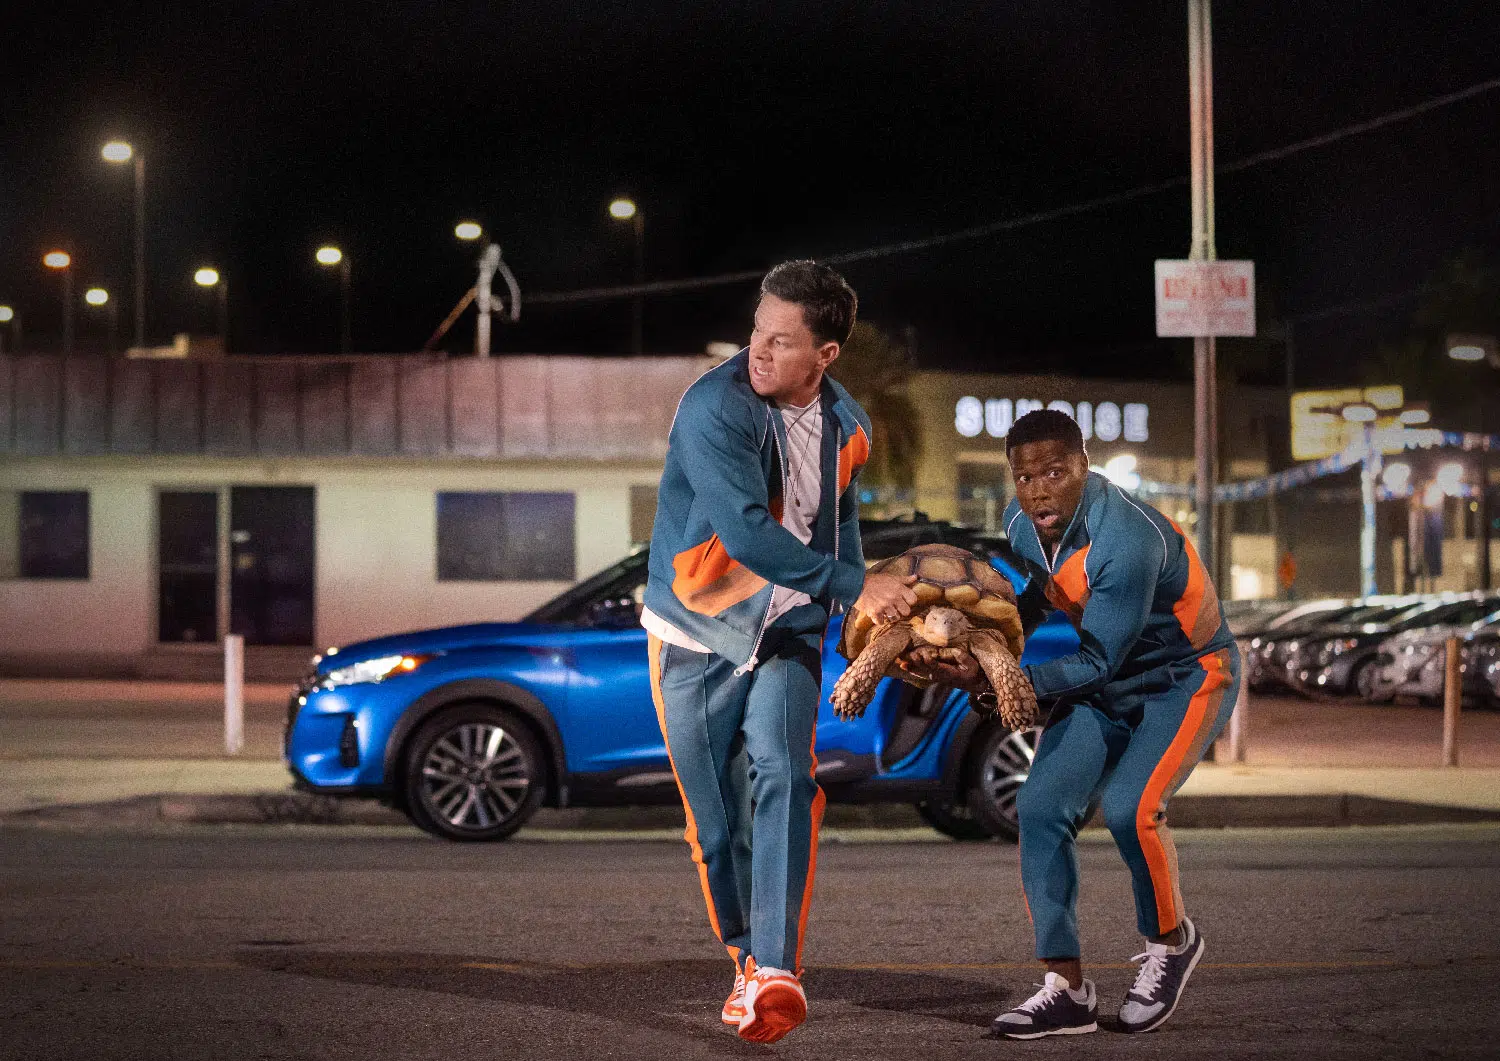 (Watch) Netflix Debuts Trailer for "Me Time" Starring Kevin Hart and Mark Wahlberg